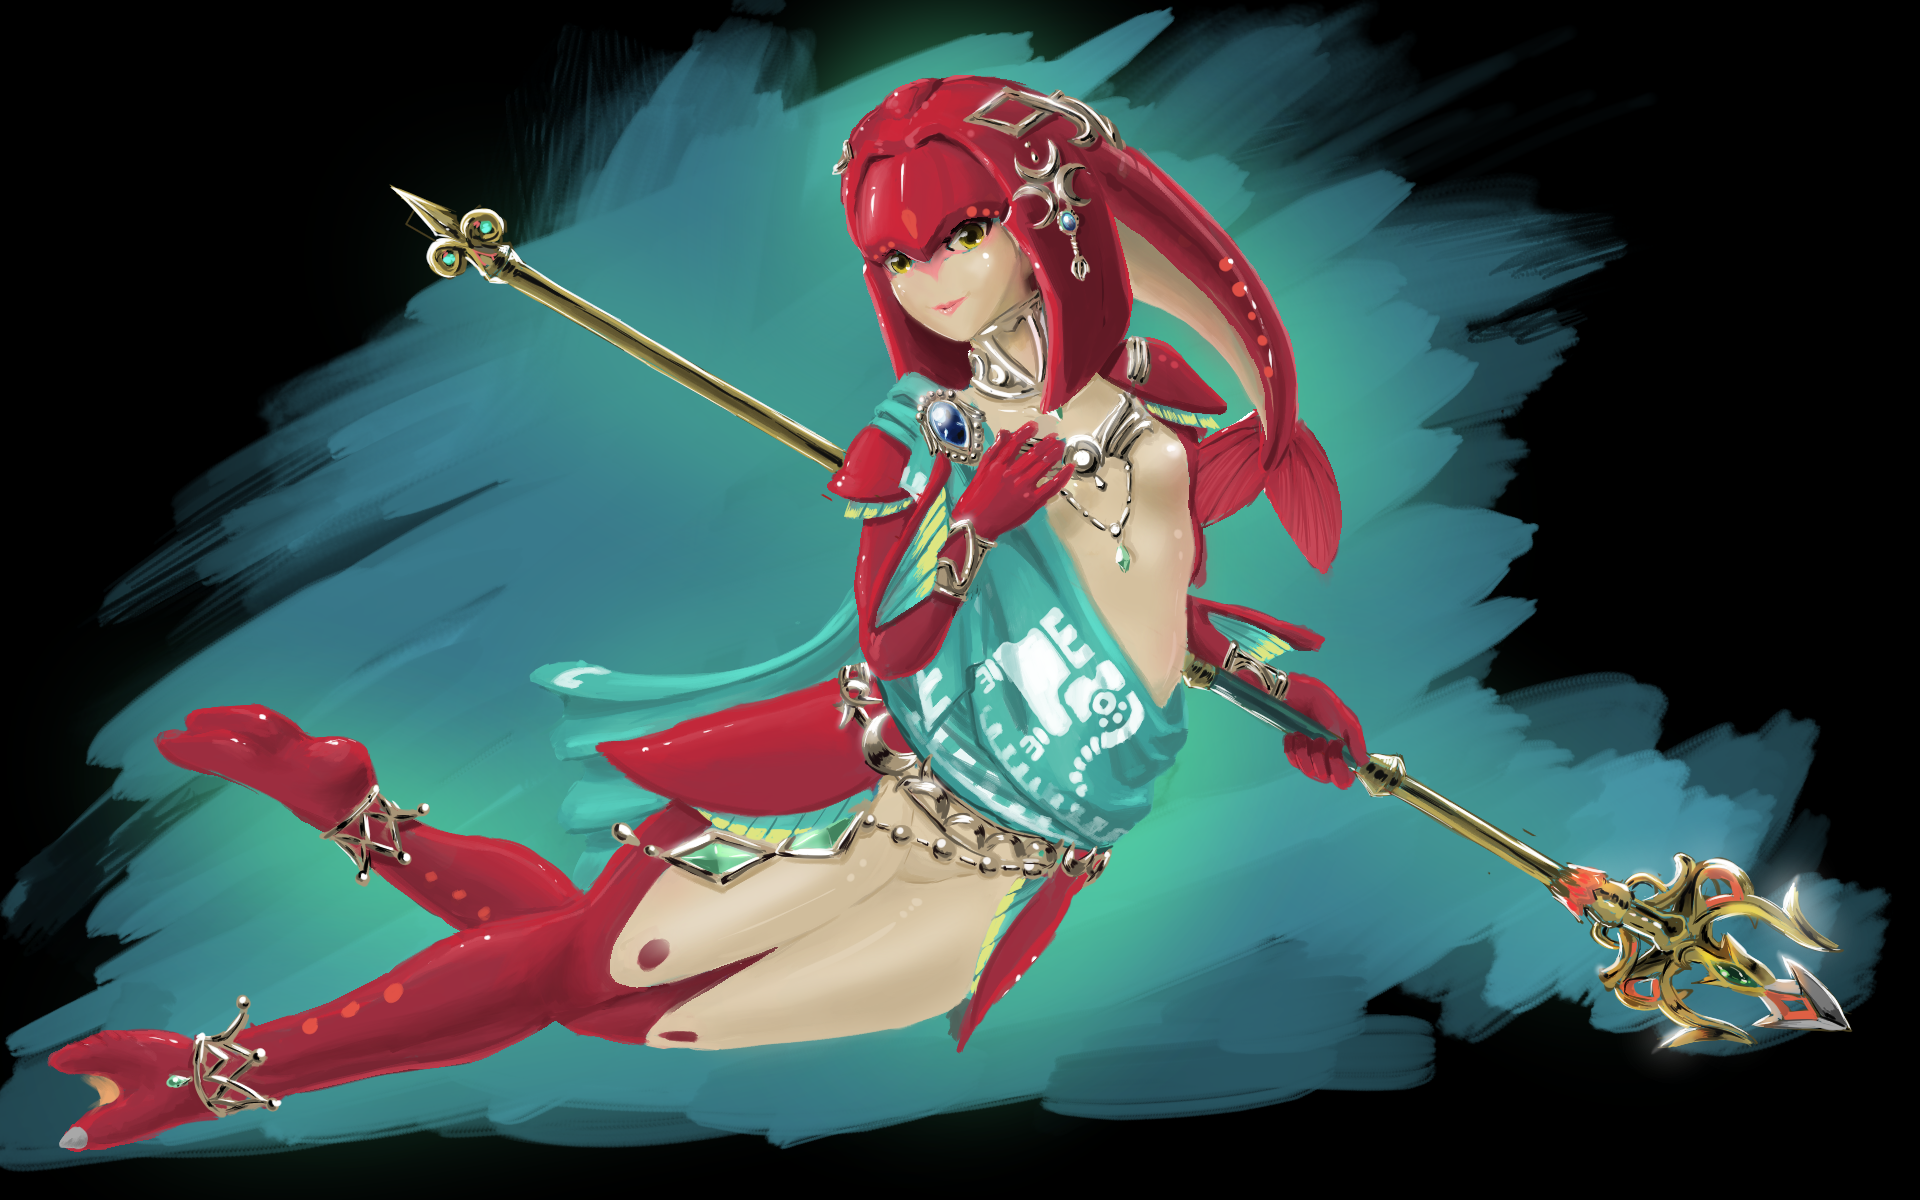 Mipha [Zelda] [Human] [Trapped in darkness, serving to protect] Minecraft Skin